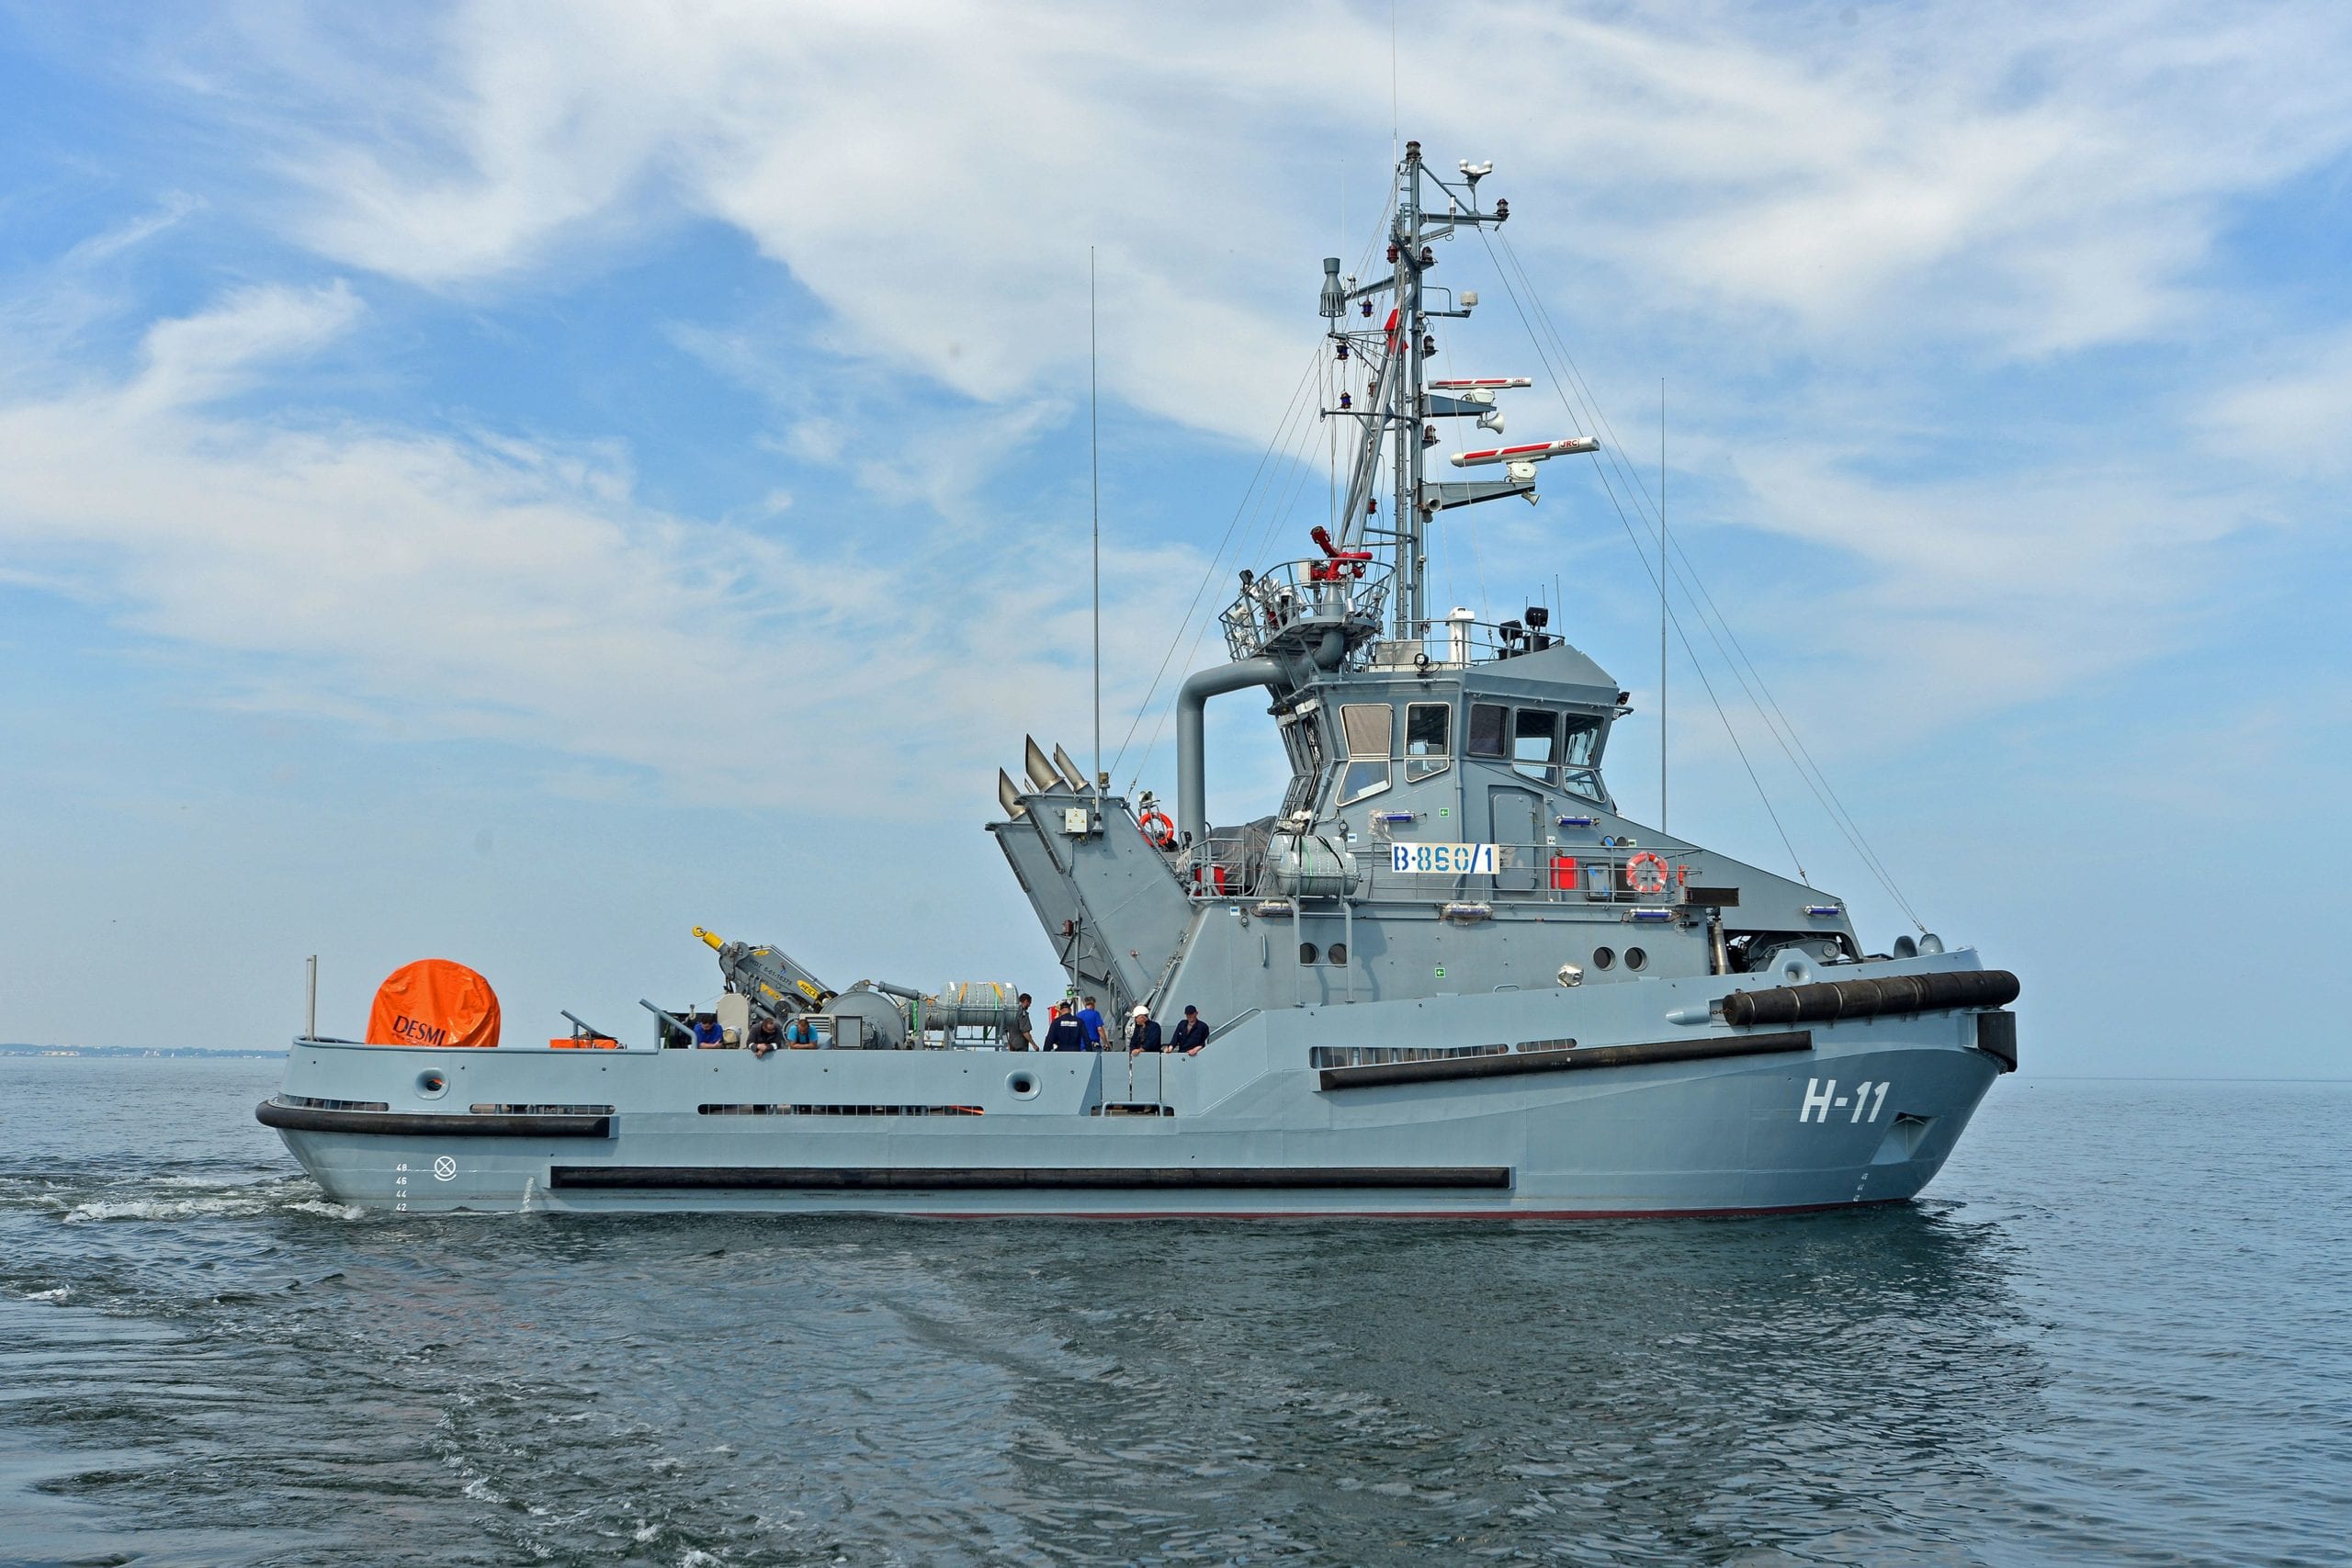 Polish Navy: Six newly built tugs driven by propulsion solutions from SCHOTTEL